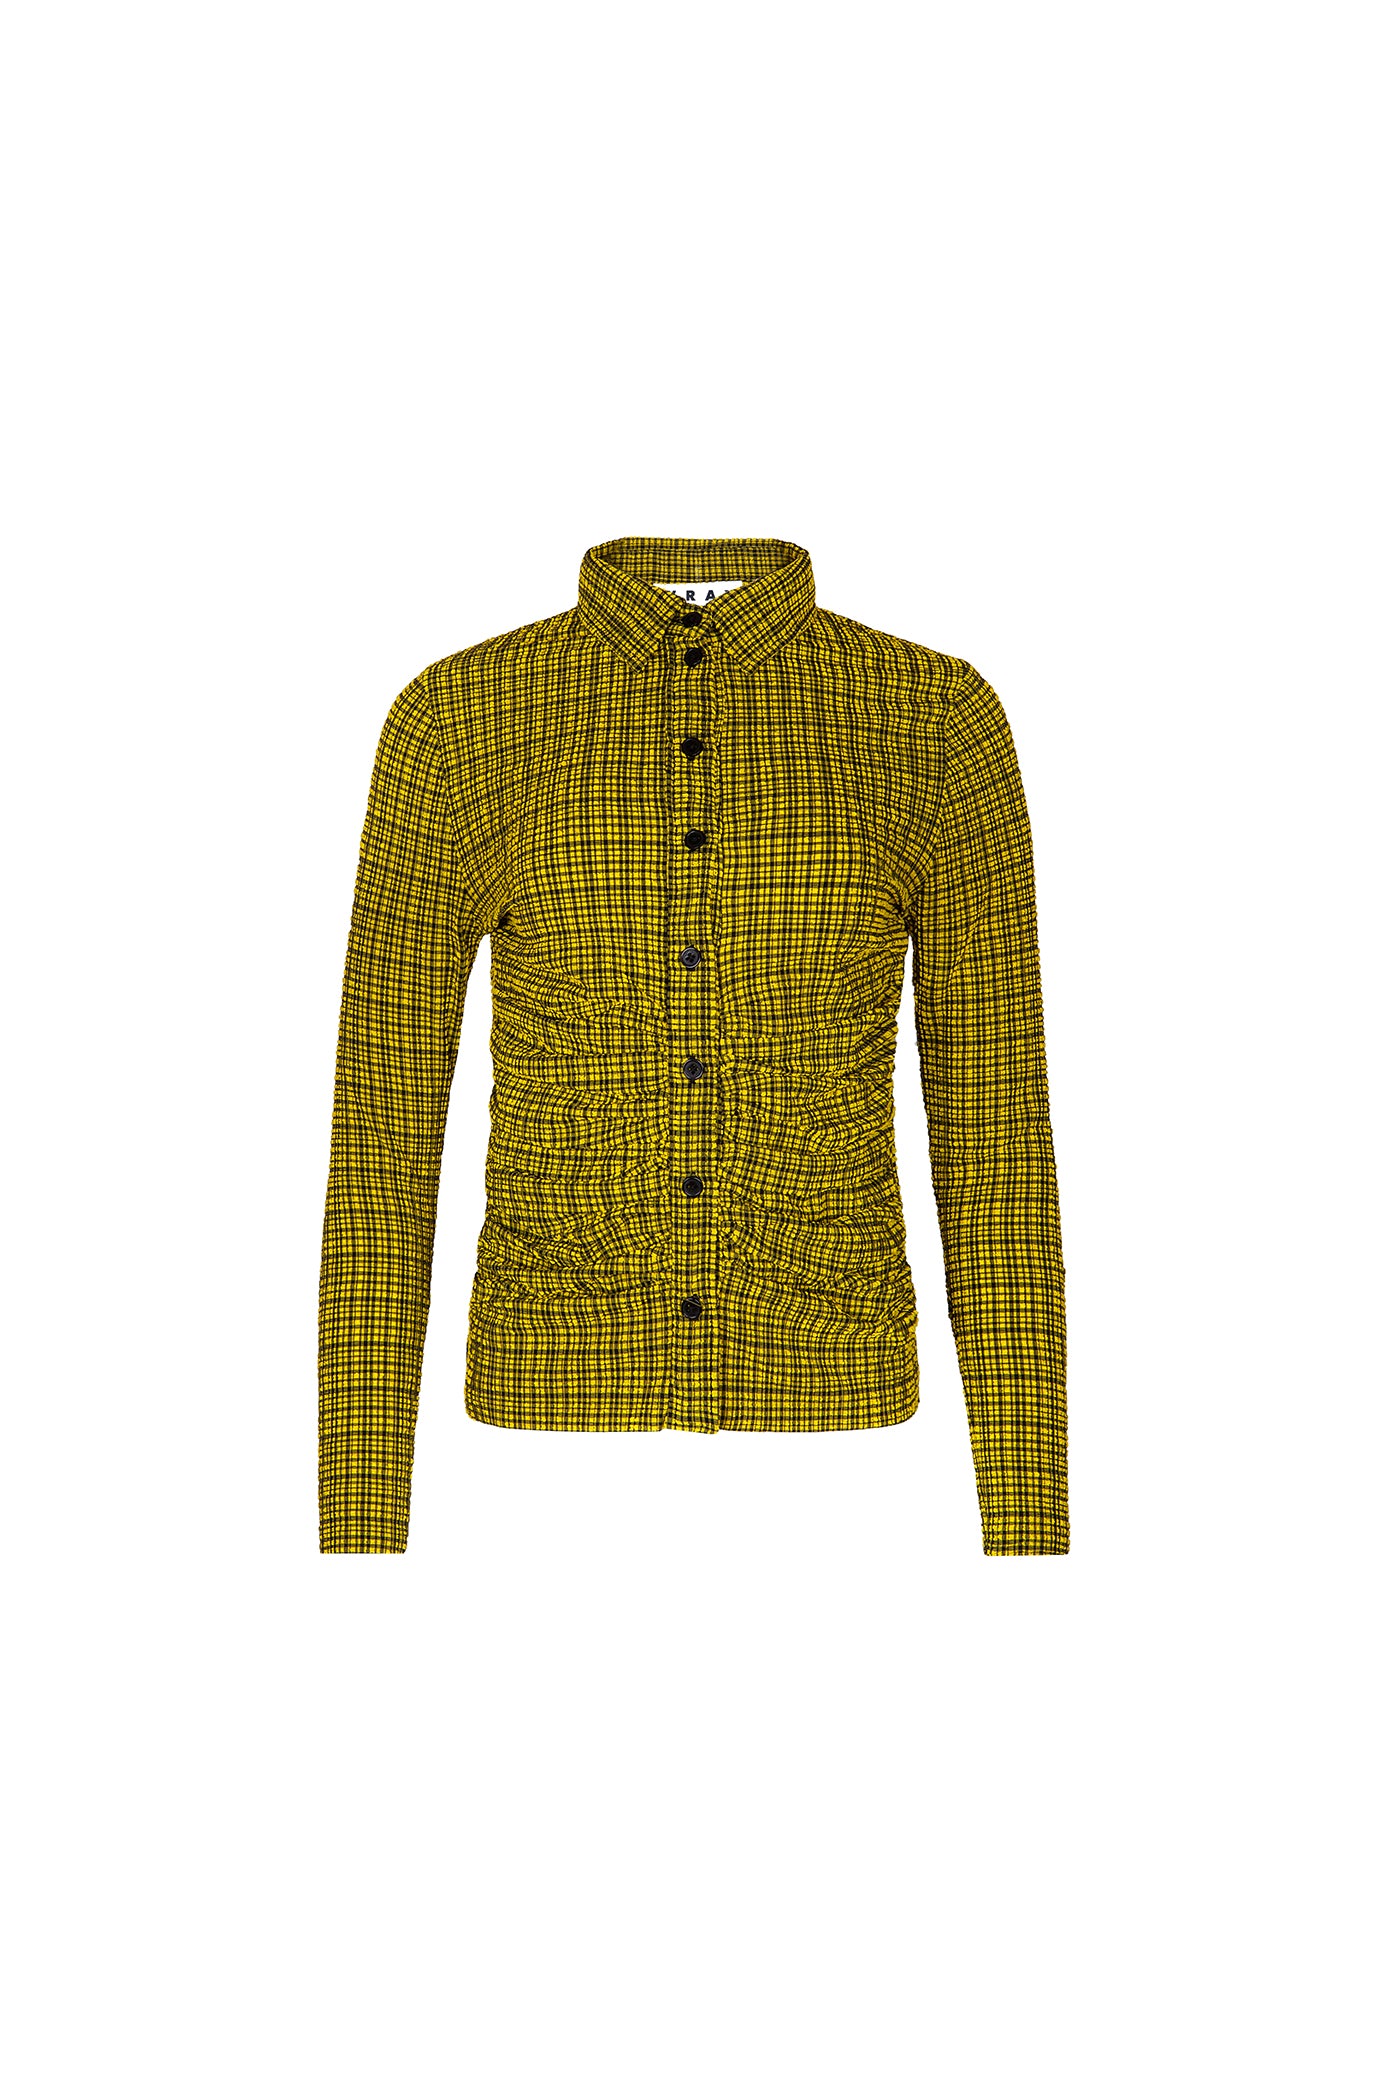 Image of Val Top - Taxi Gingham